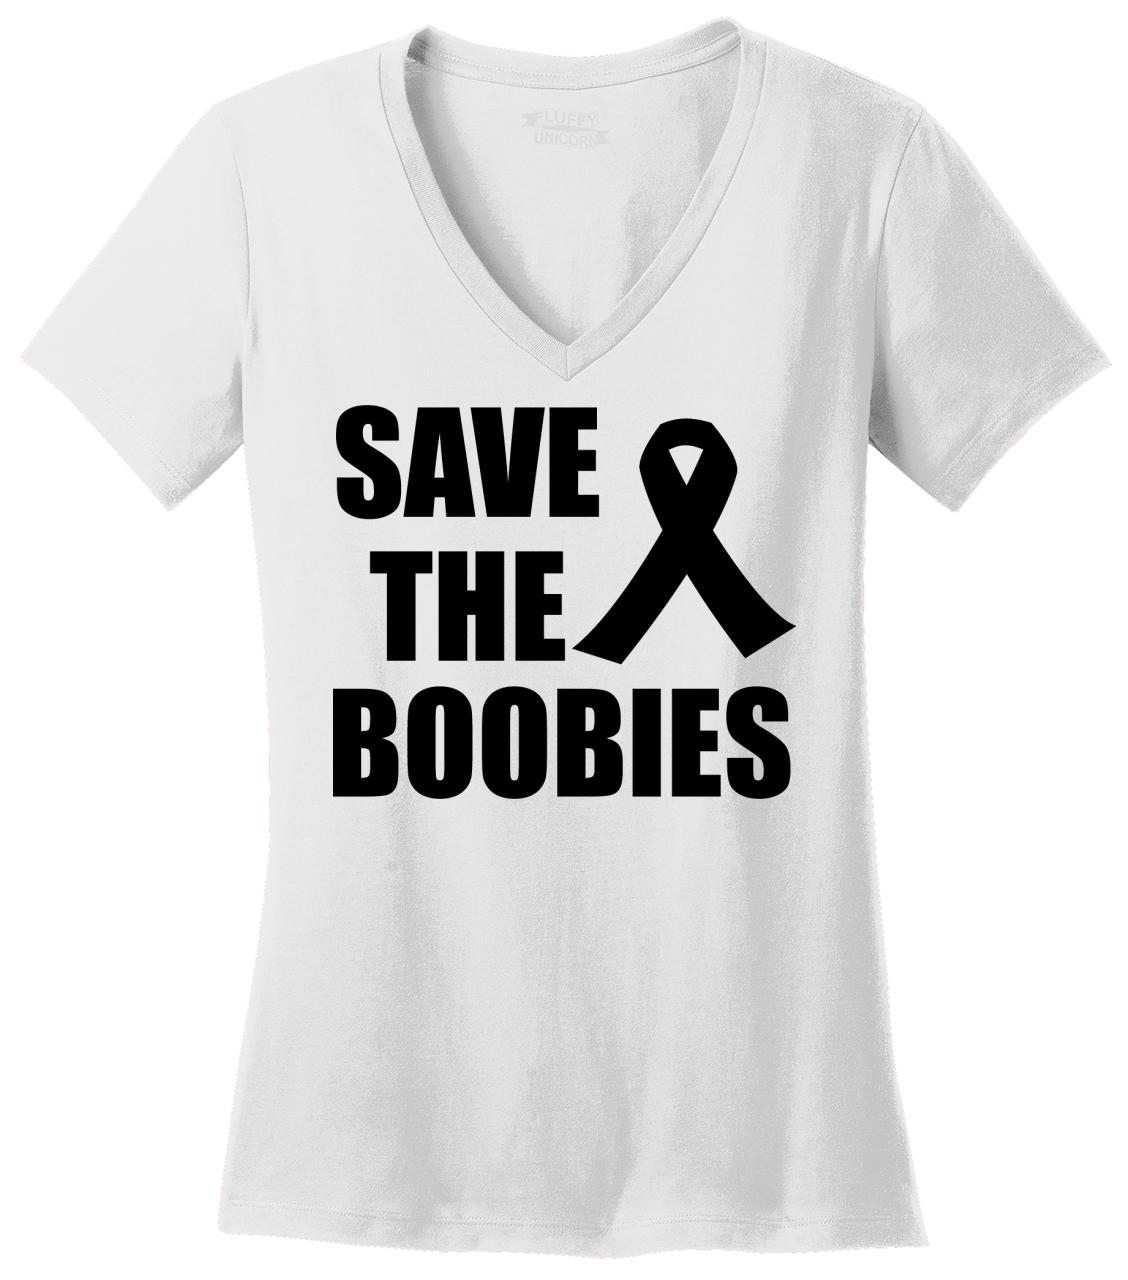 Ladies Breast Cancer Awareness Save The Boobies V-Neck Shirt SAVE-N1540